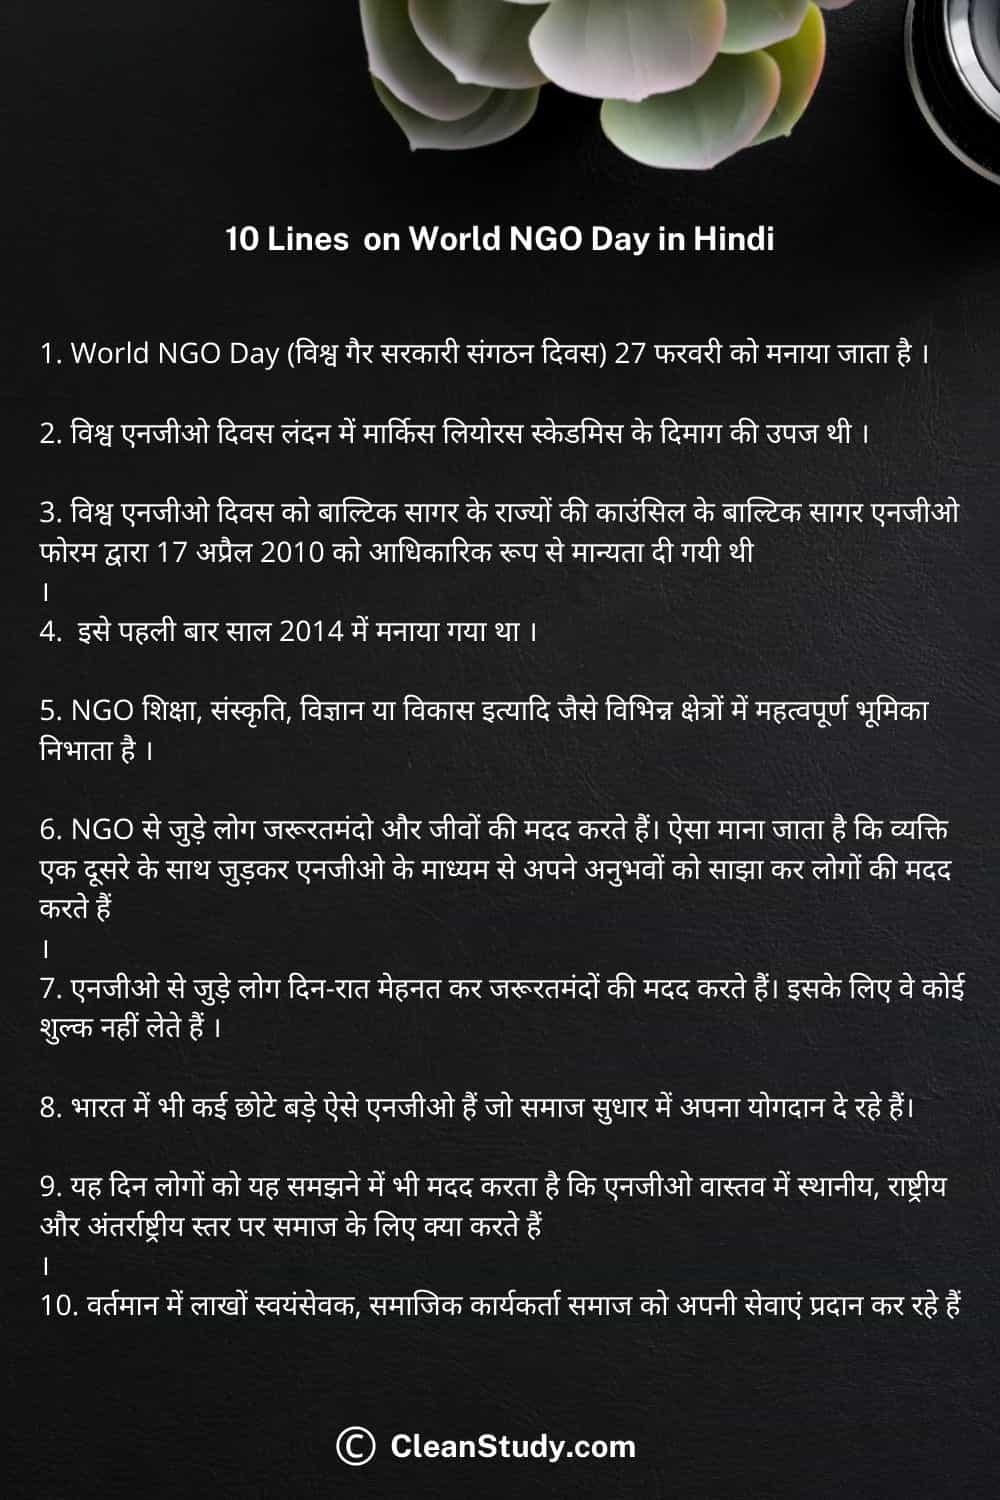 10 lines on worlds ngo day in hindi